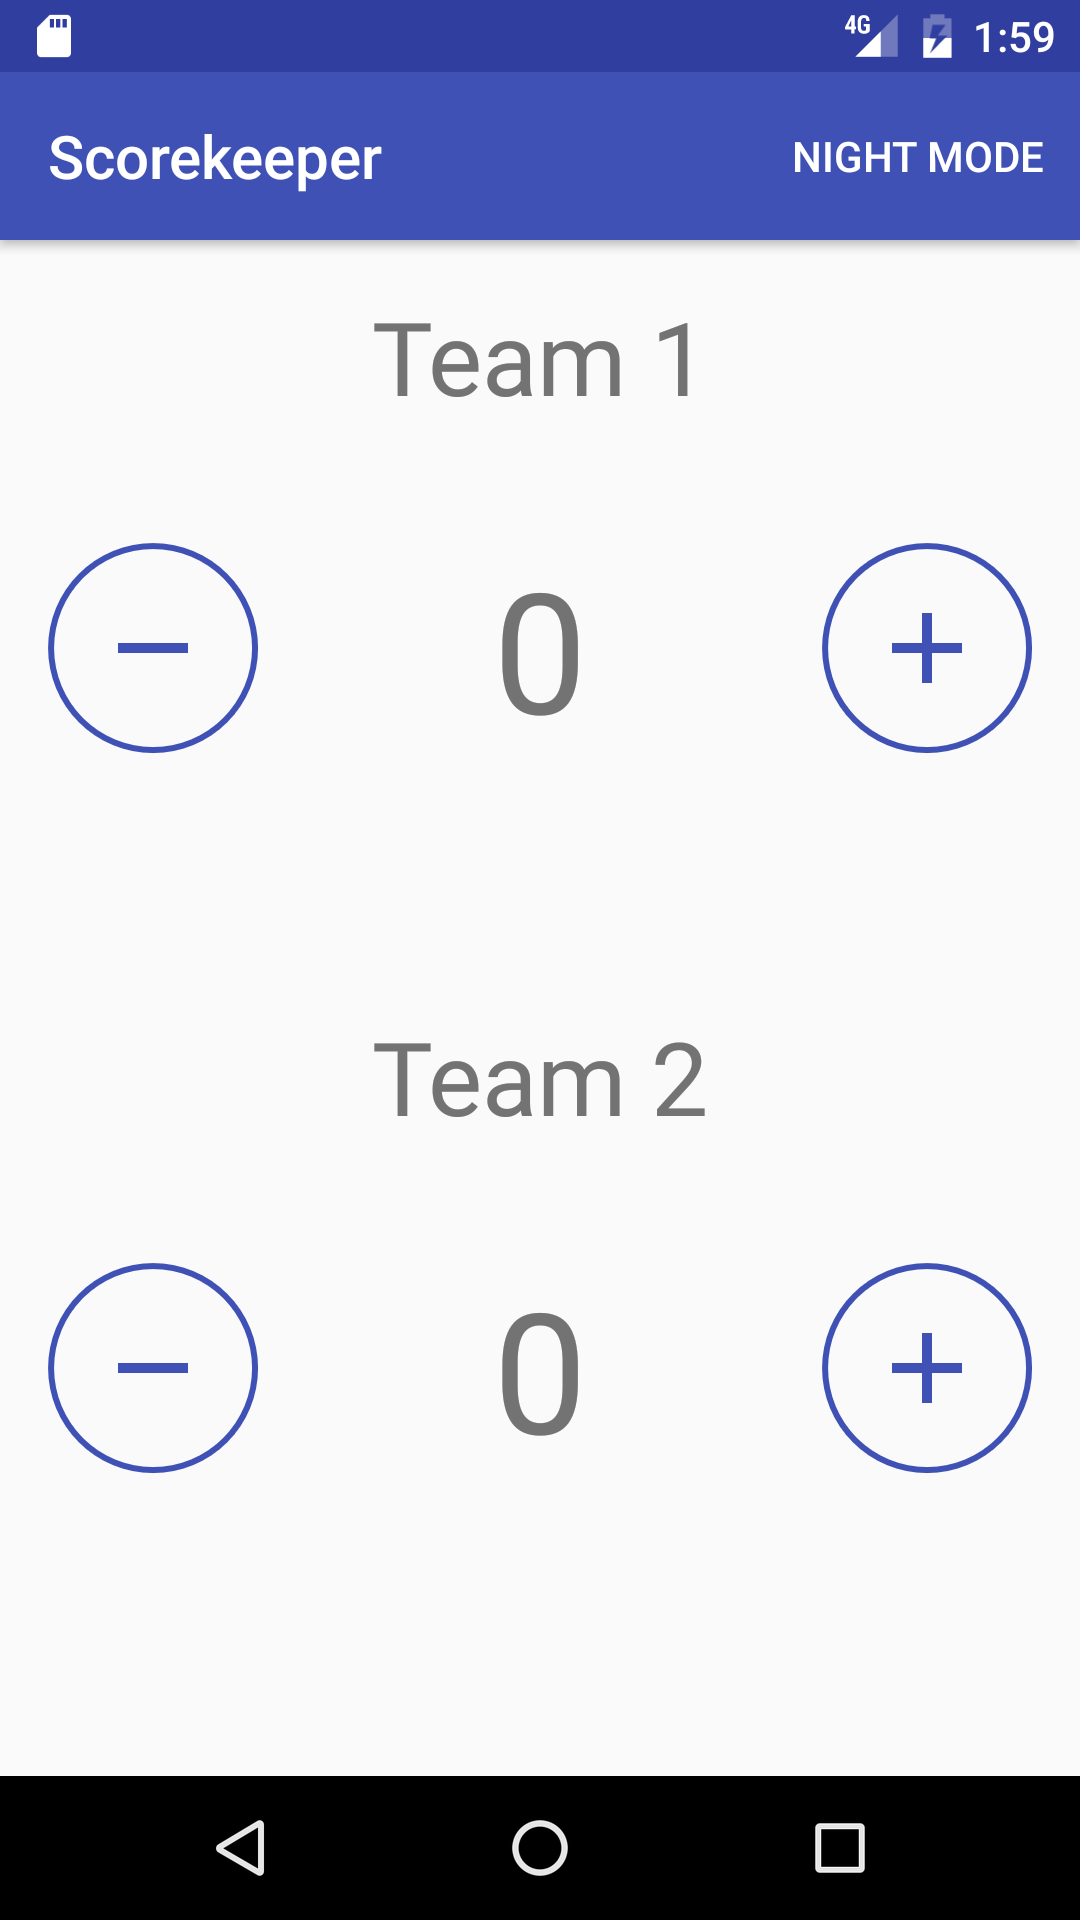 Preview for the Scorekeeper app in Day Mode